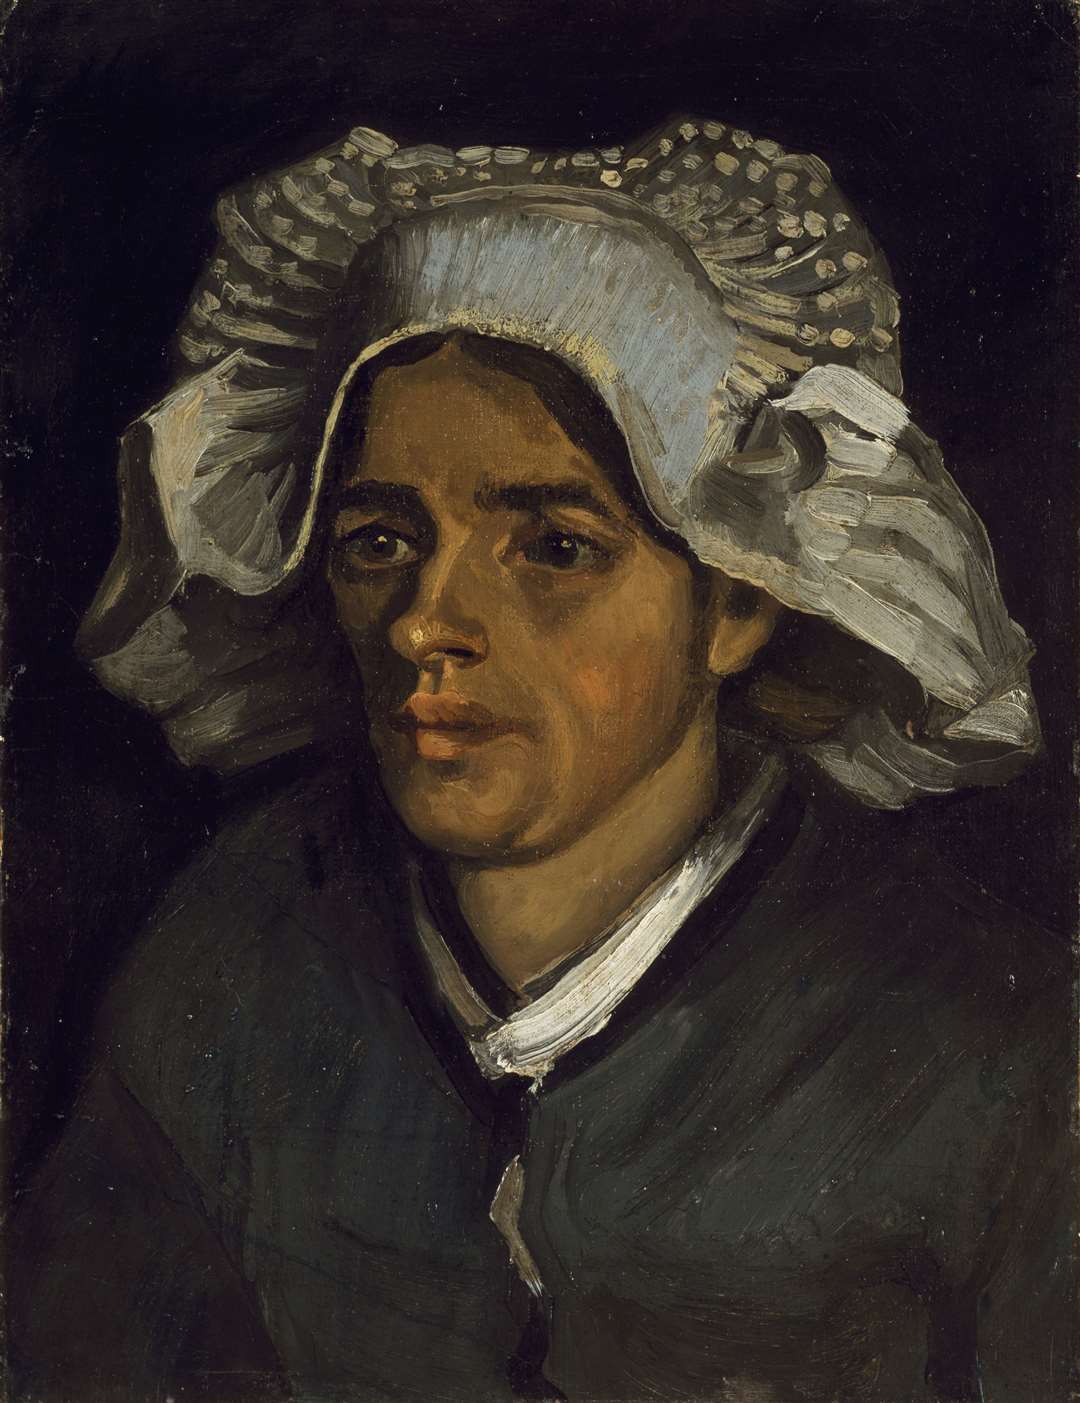 The x-ray image was found on the back of the painting Head of a Peasant Woman (National Galleries of Scotland)